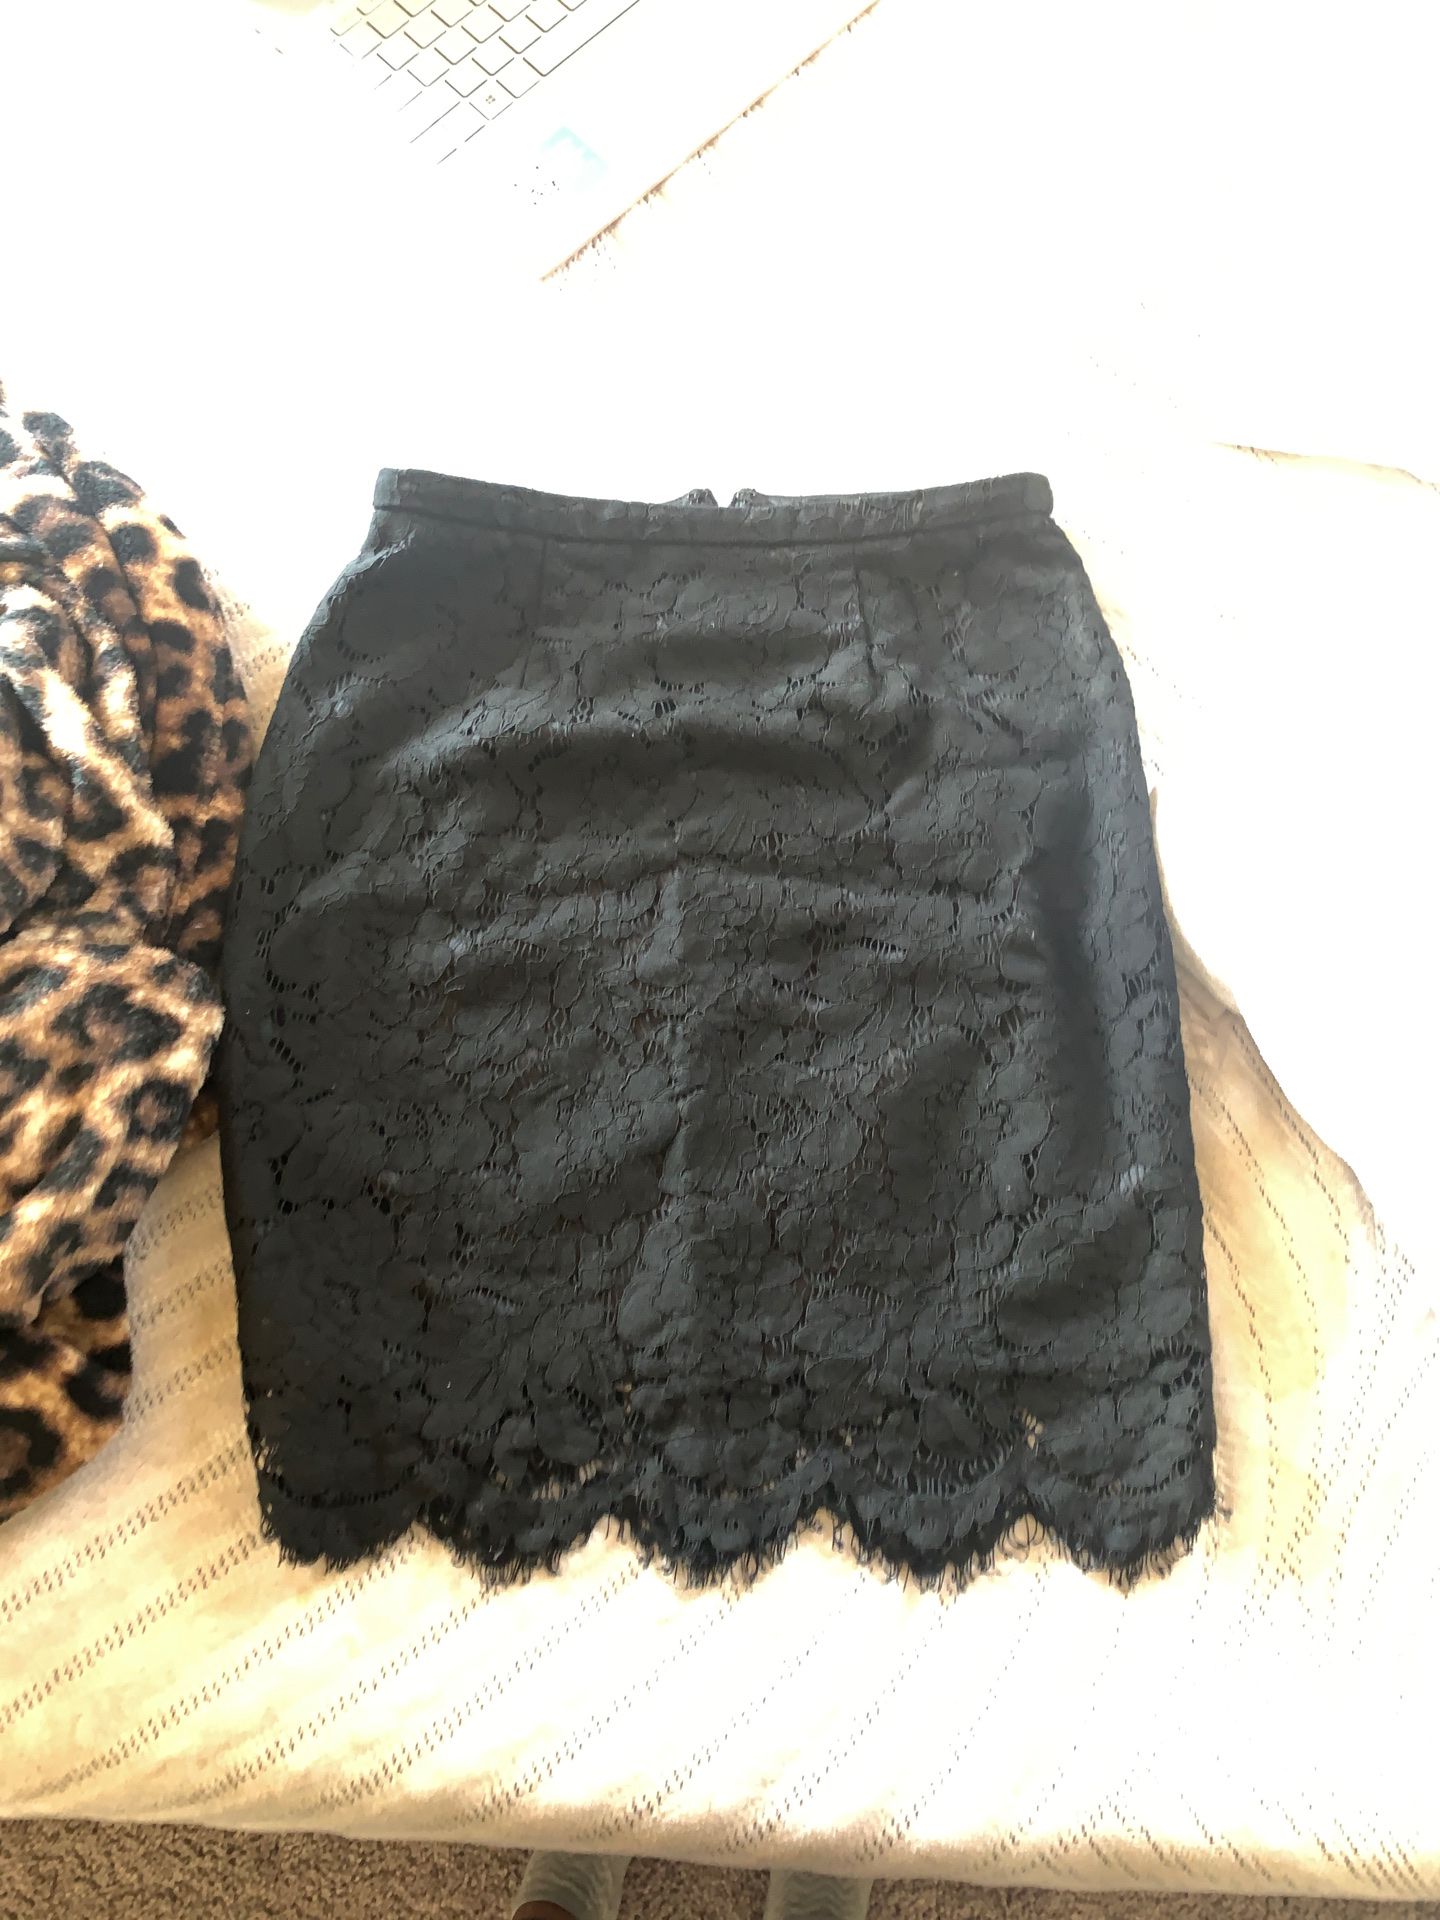  pencil skirt size M new